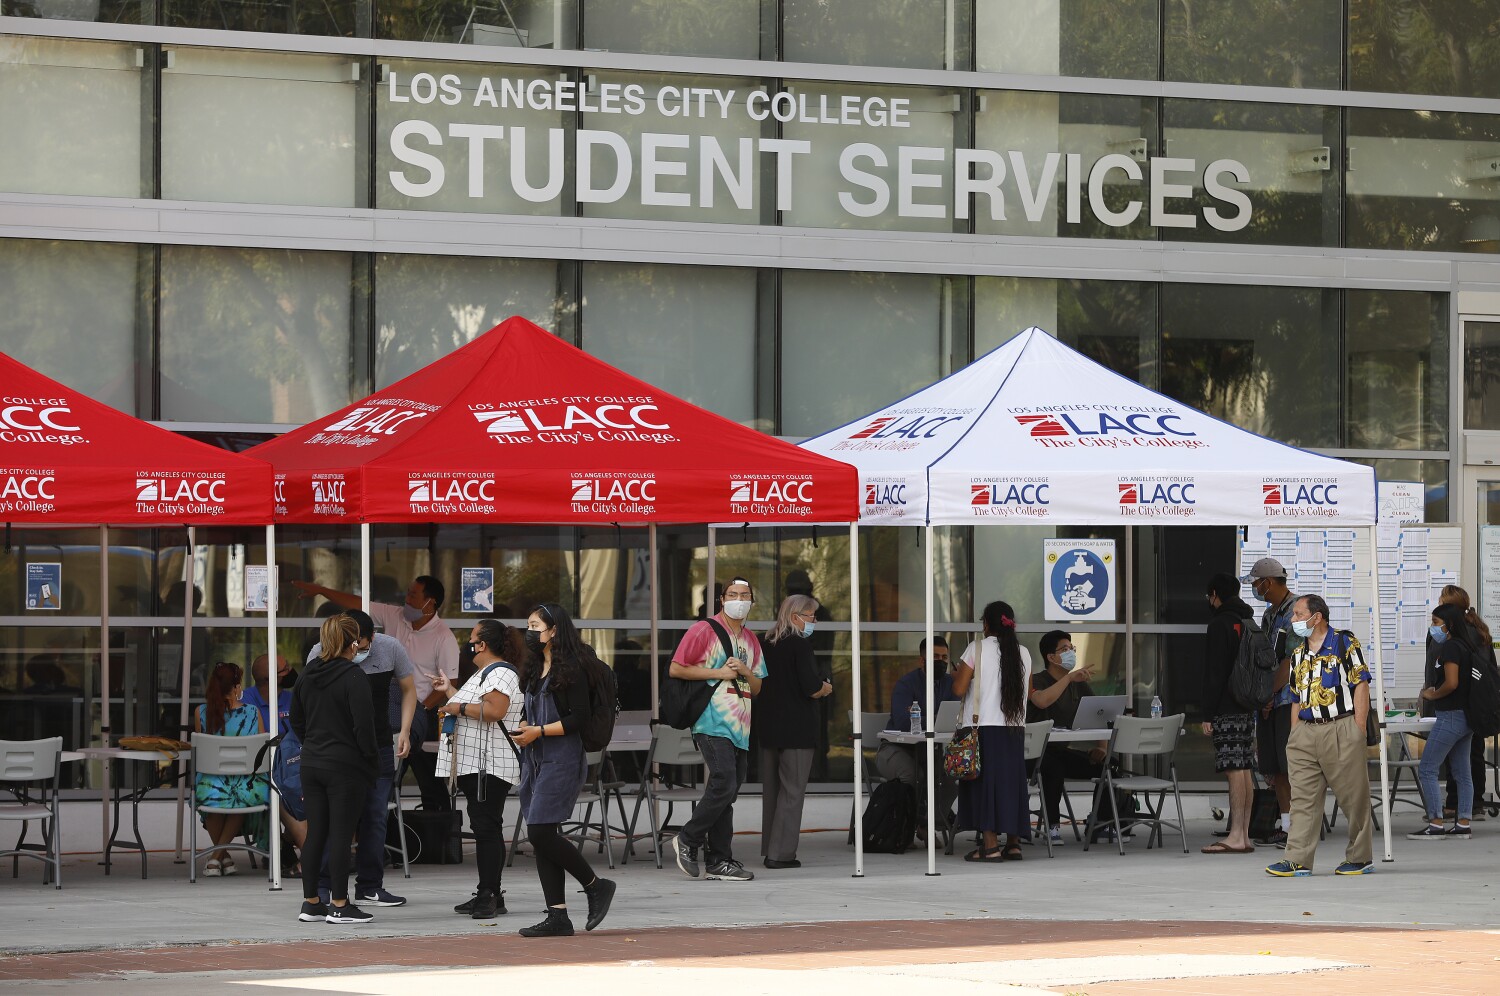 California community college financial aid scam triggers federal warning to other campuses 